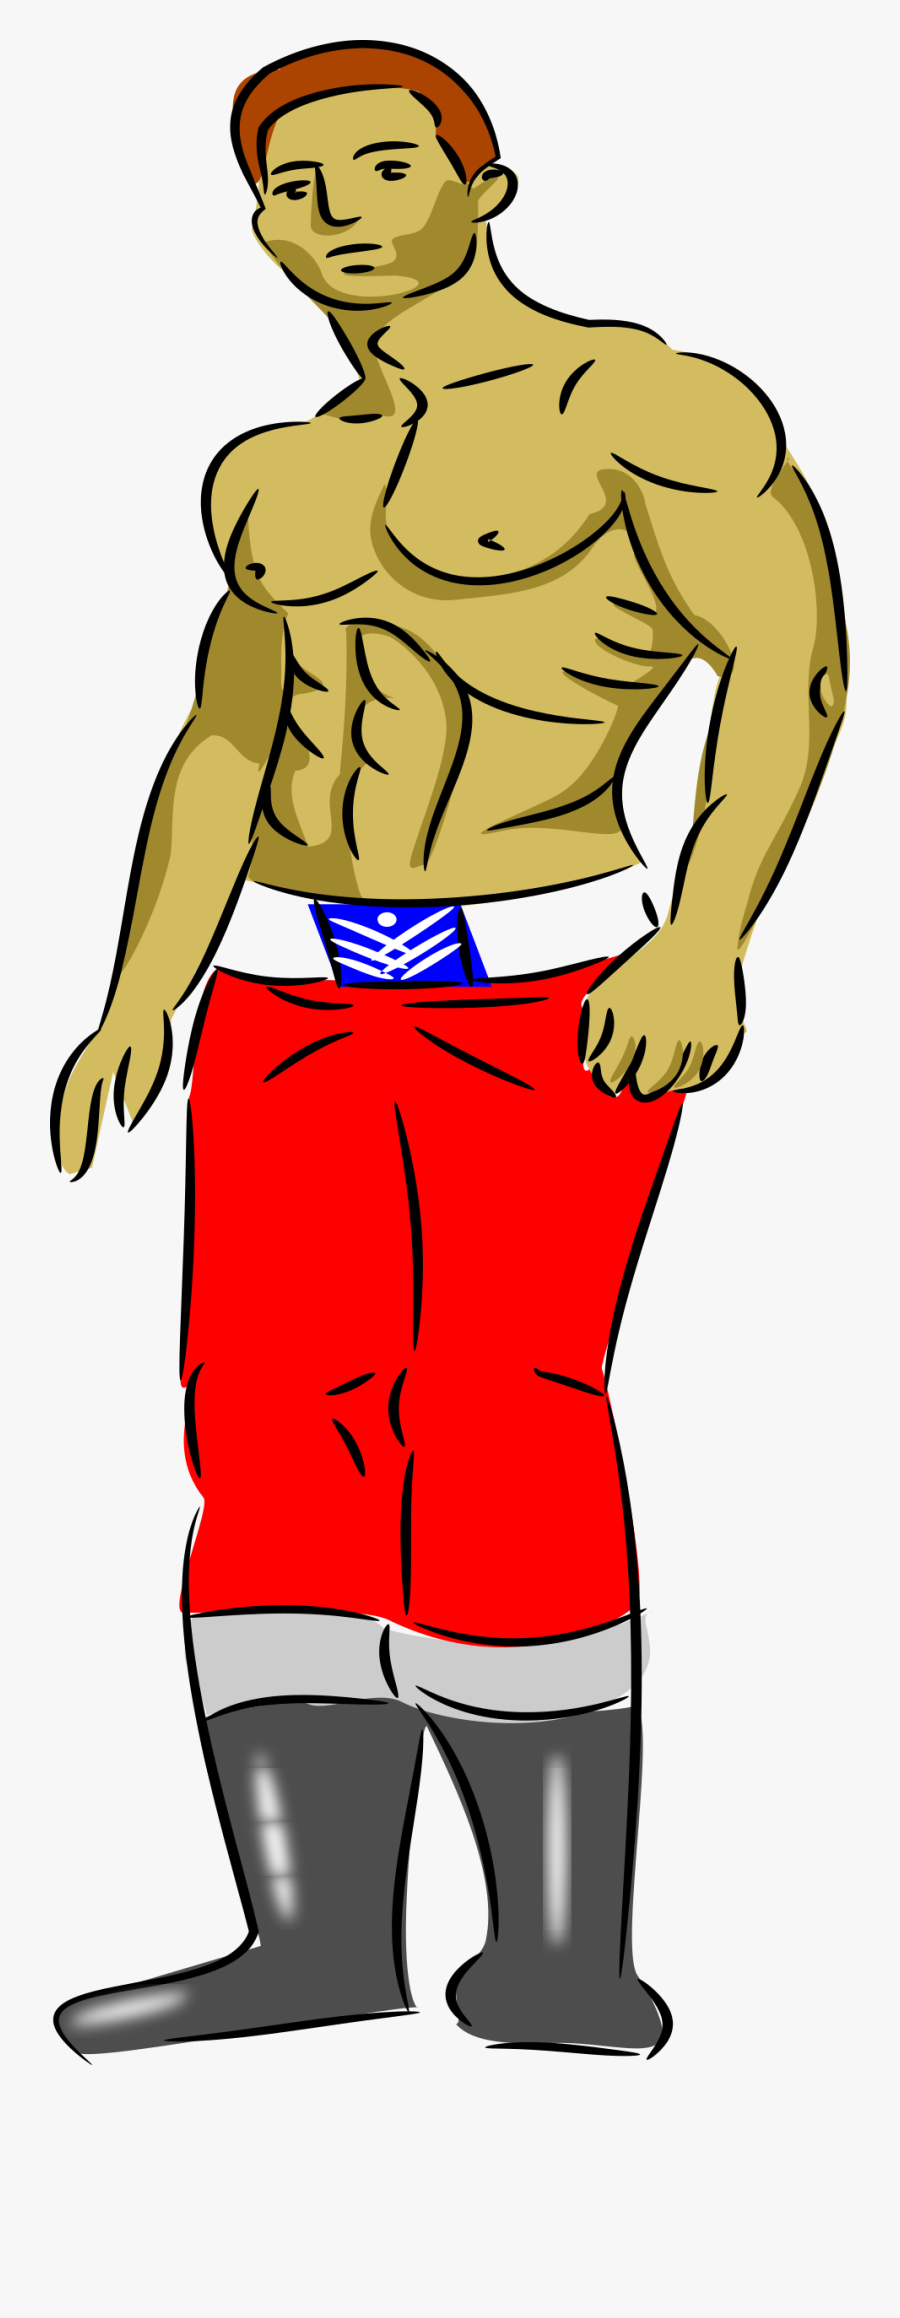 Bodybuilder - Cartoon Body Without Head Png, Transparent Clipart